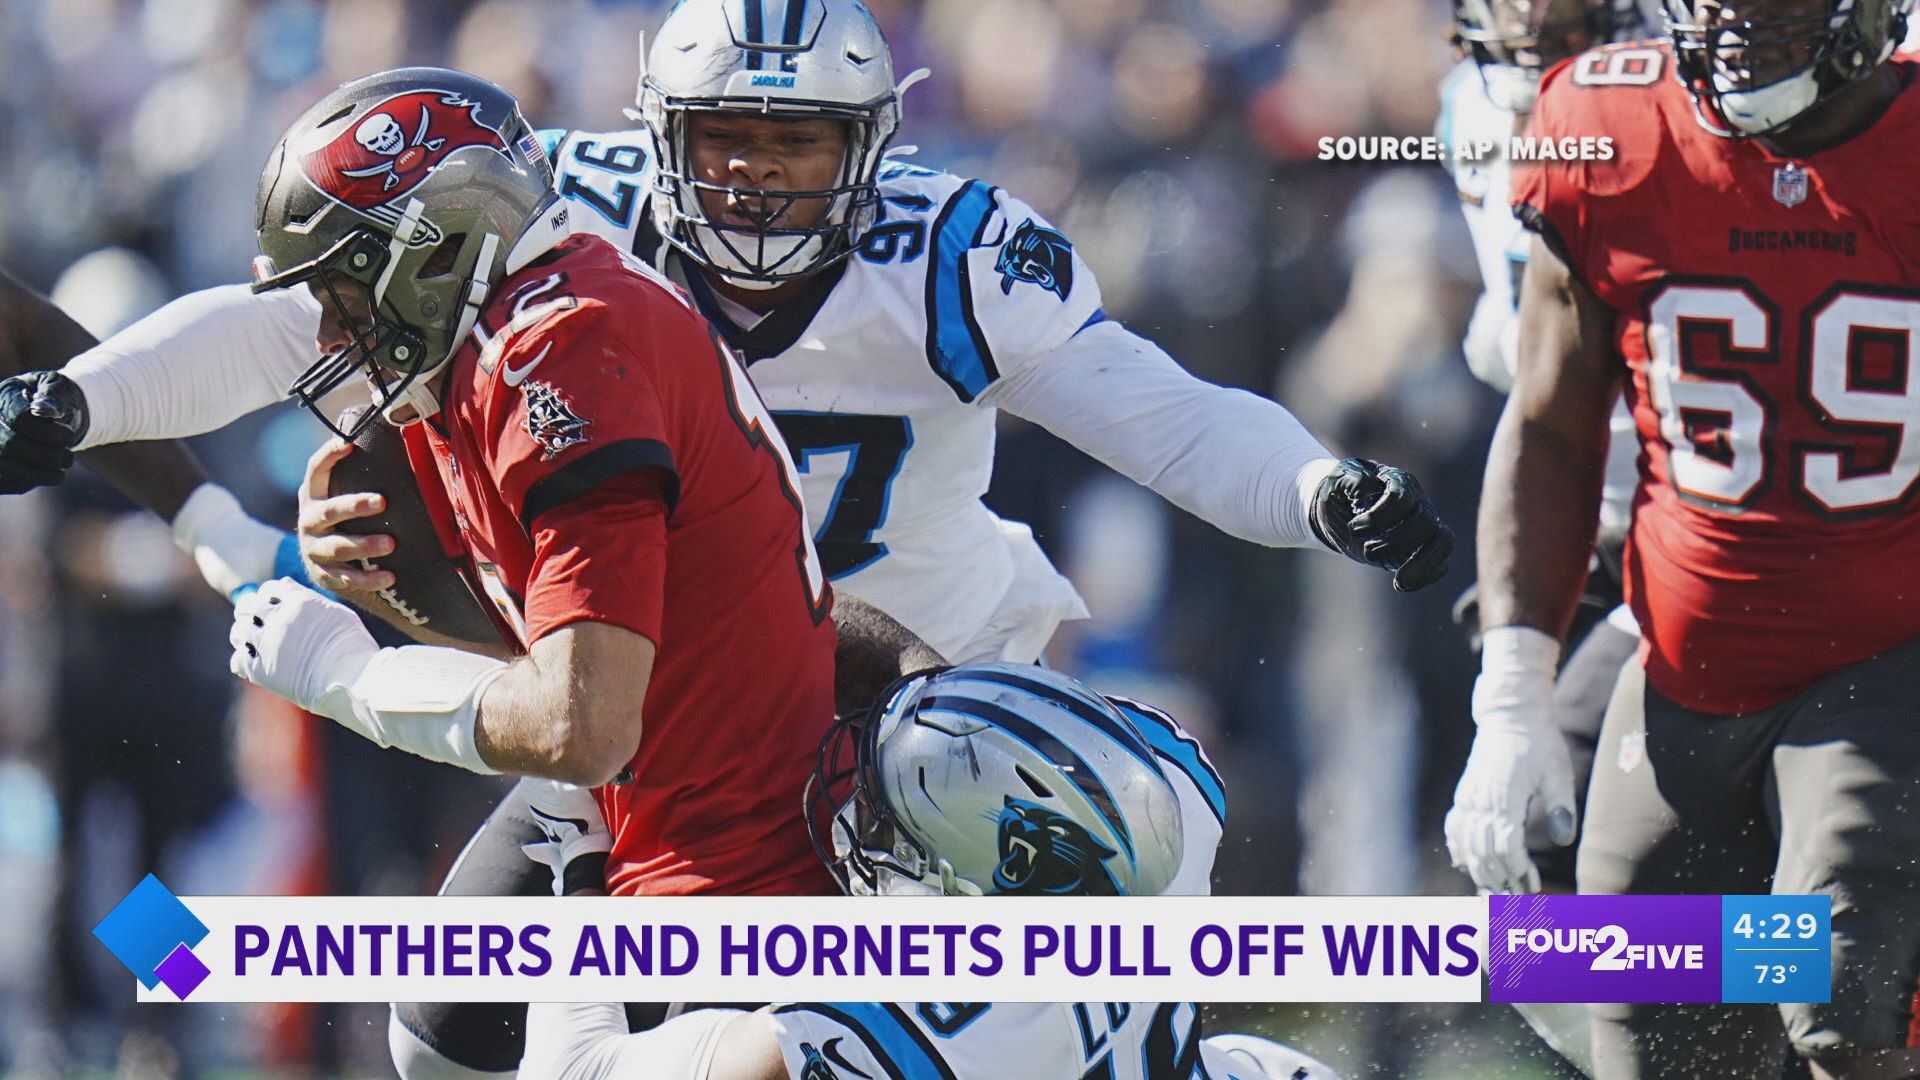 The Panthers were the 13-point underdogs against the Bucs and managed to dominate in an 18-point win.